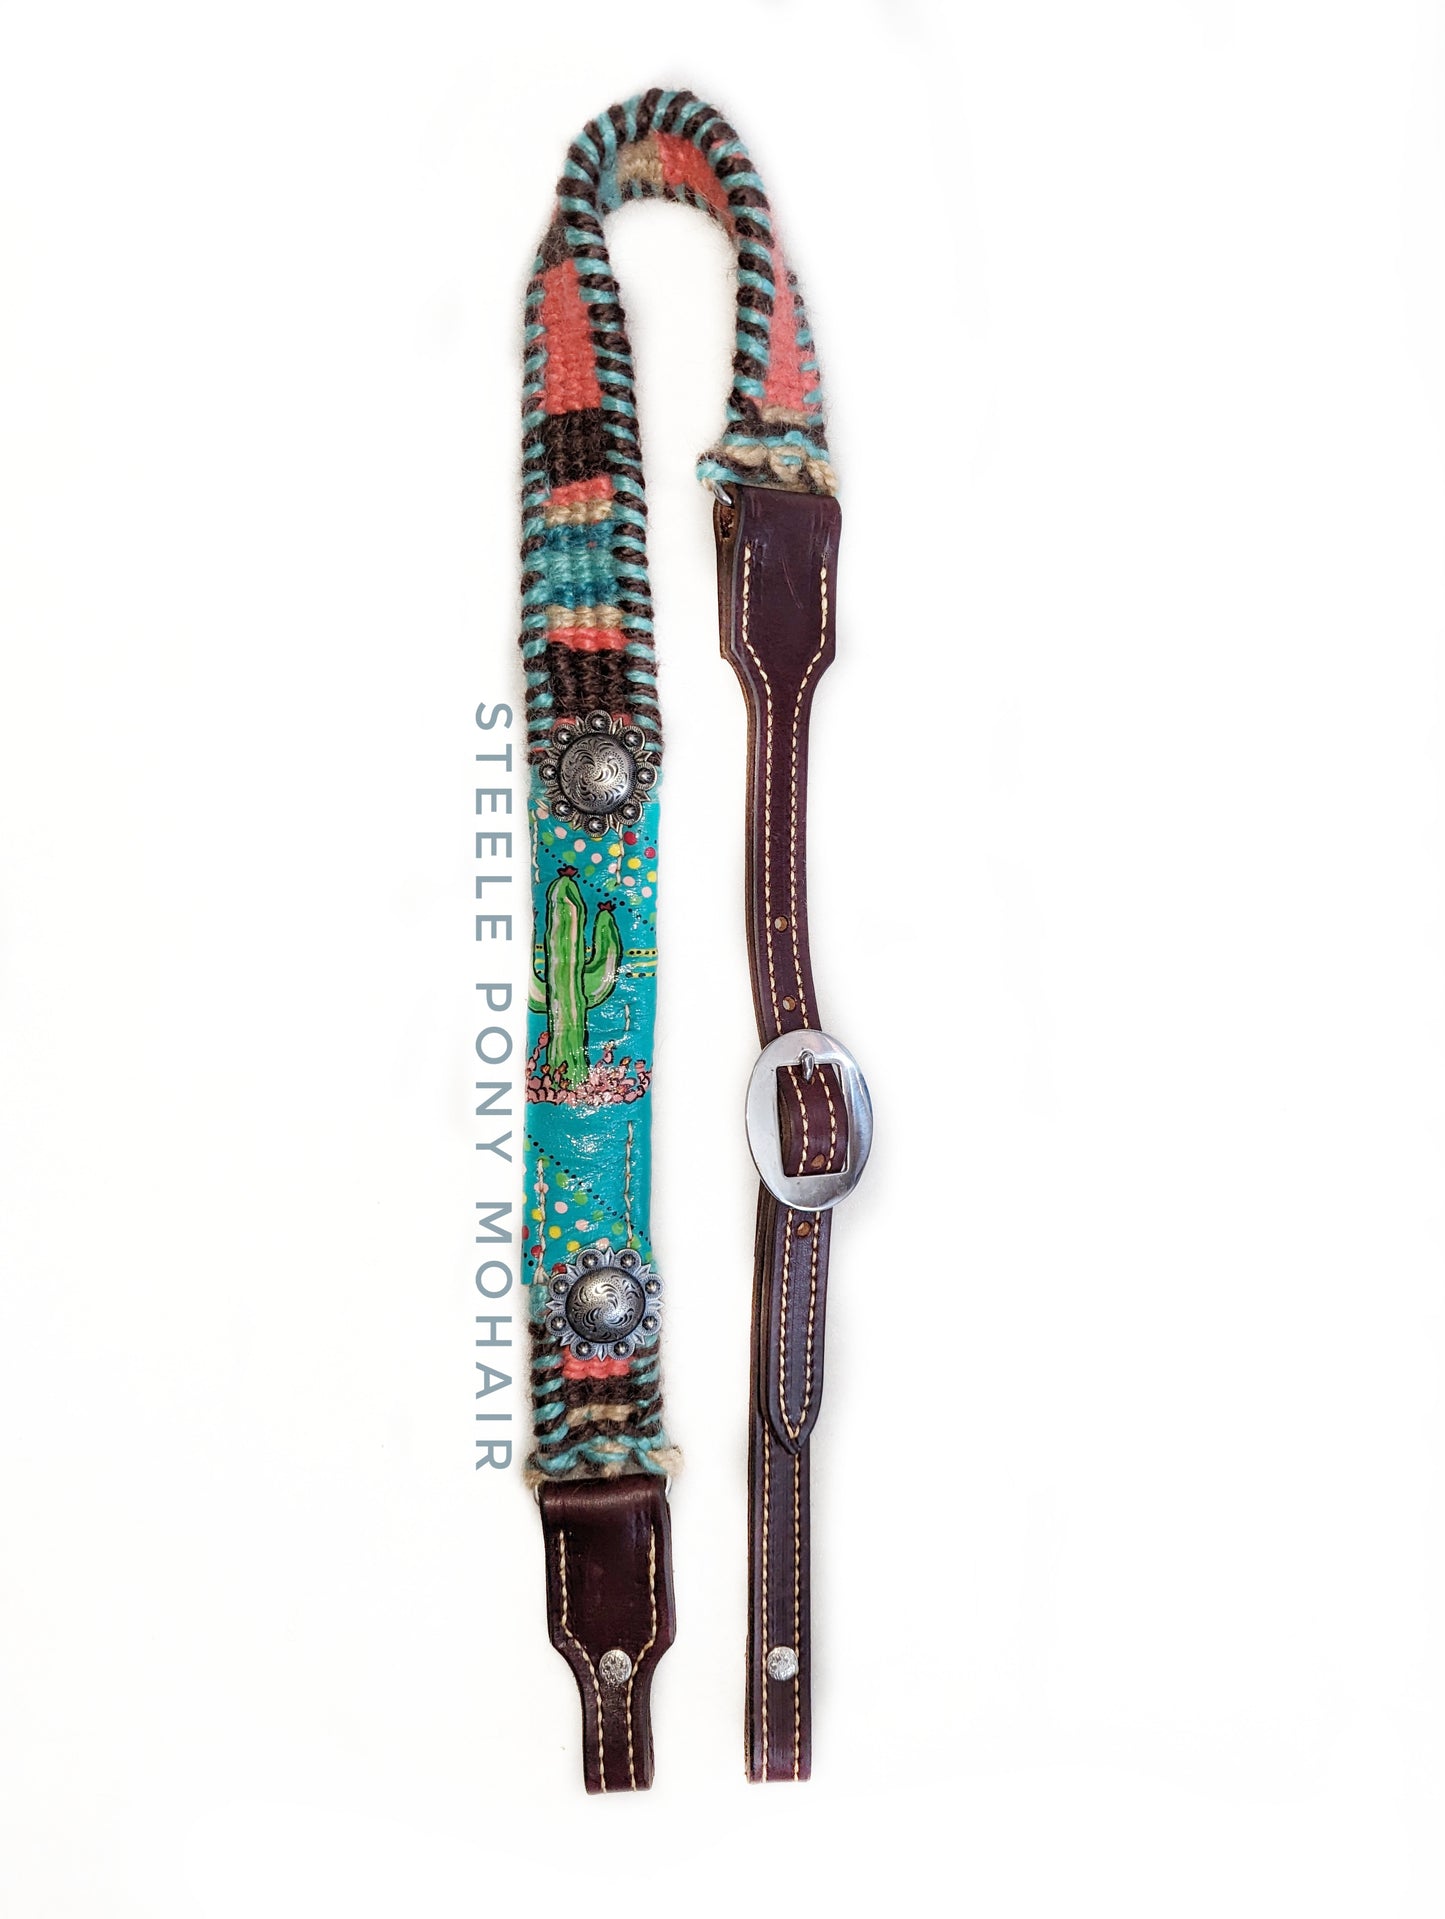 Hand painted, cactus & coral headstall